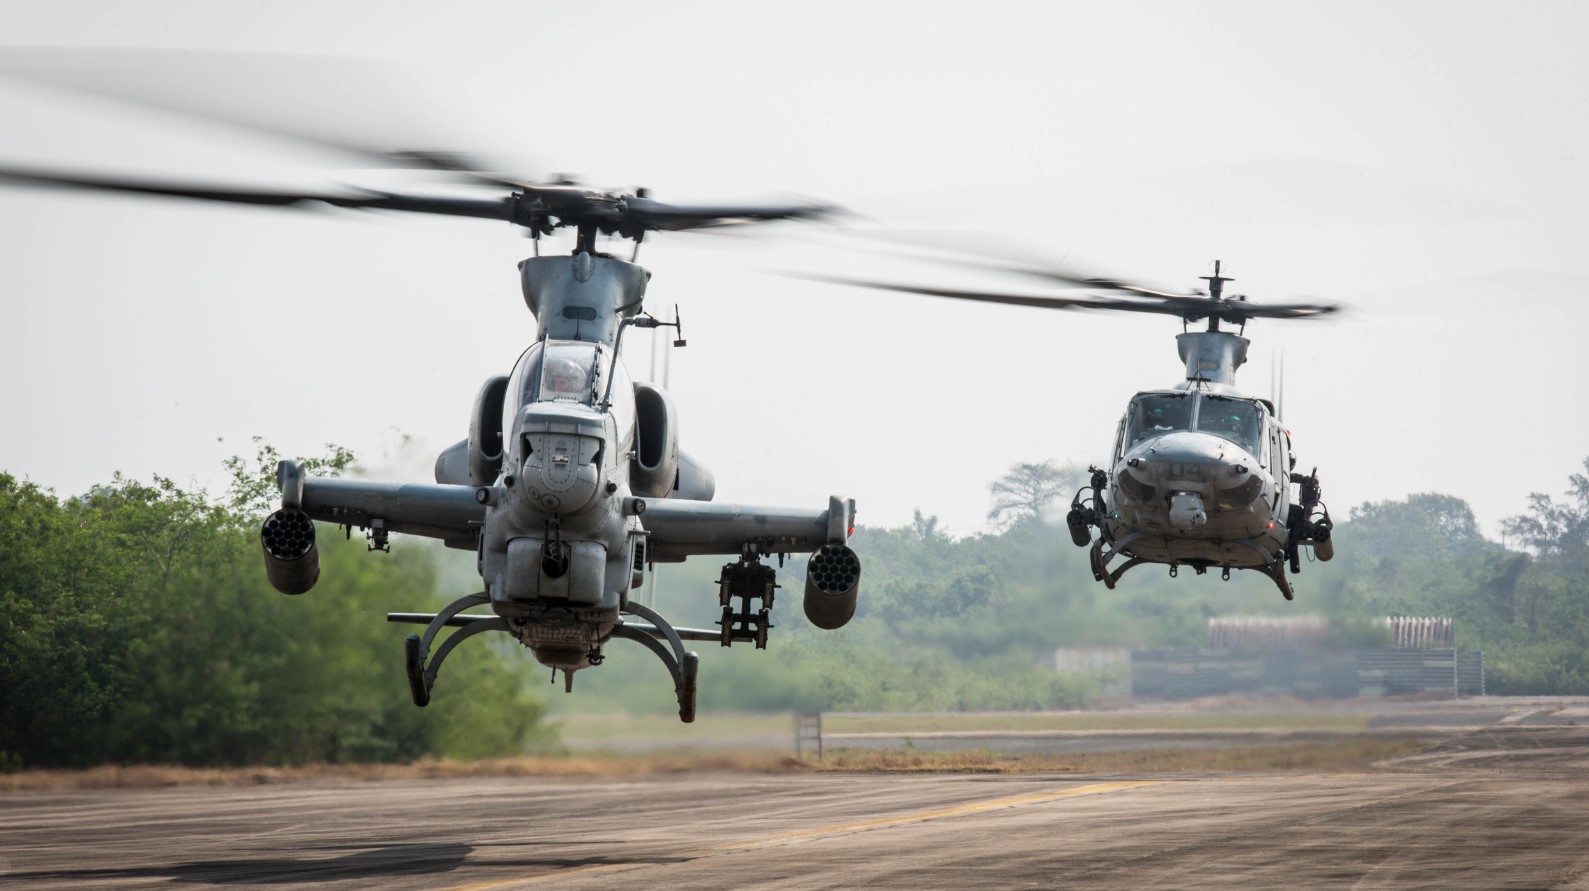 US Marines receive final AH-1Z Viper attack helicopter, completing H-1 program | Defense Brief